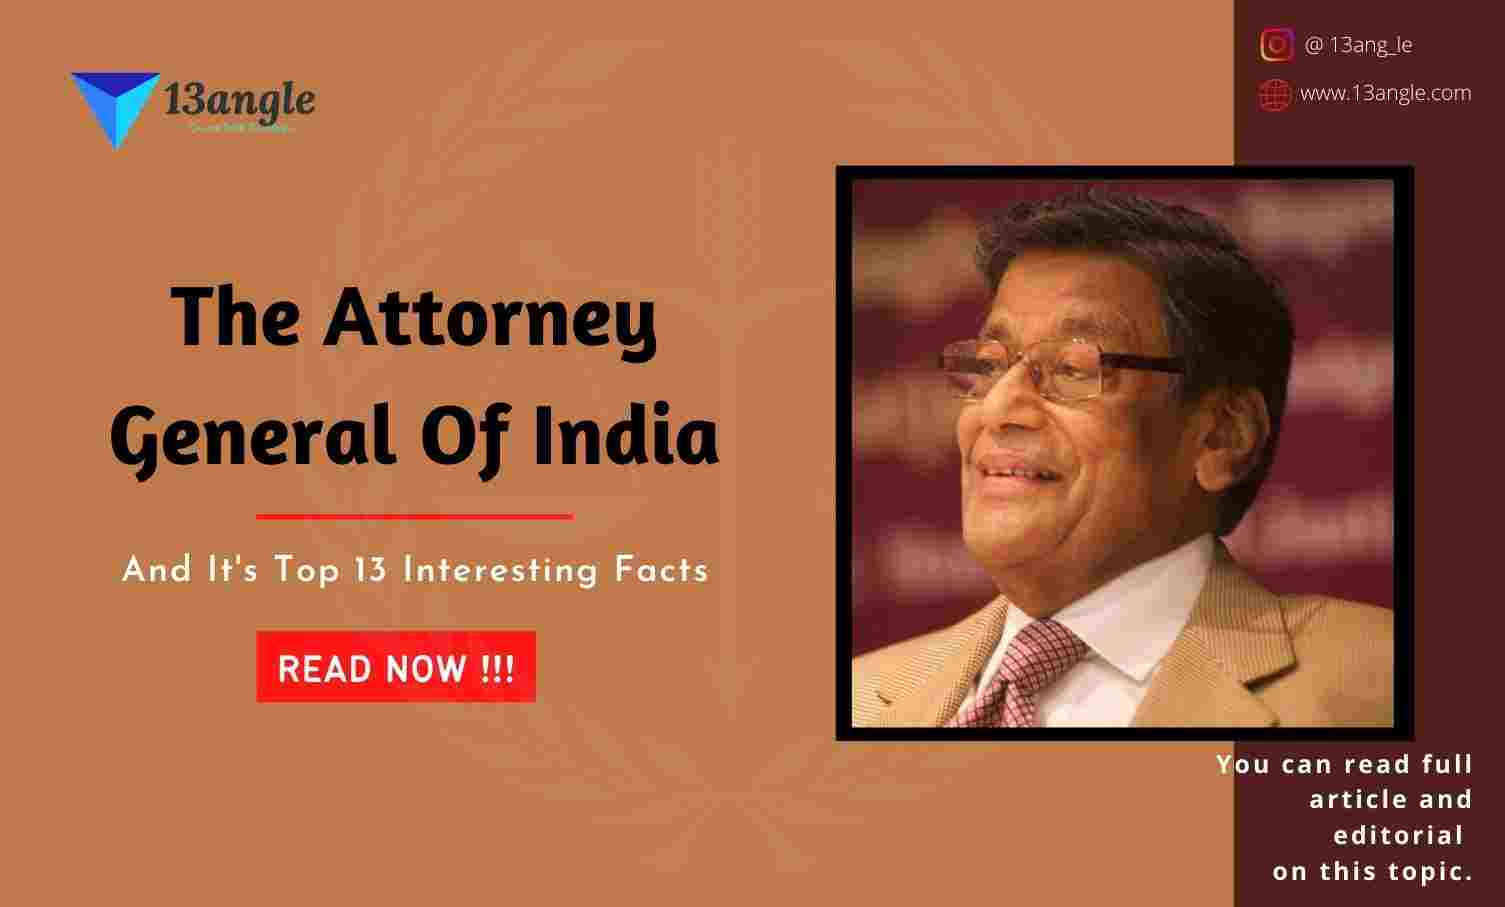 The Attorney General Of India